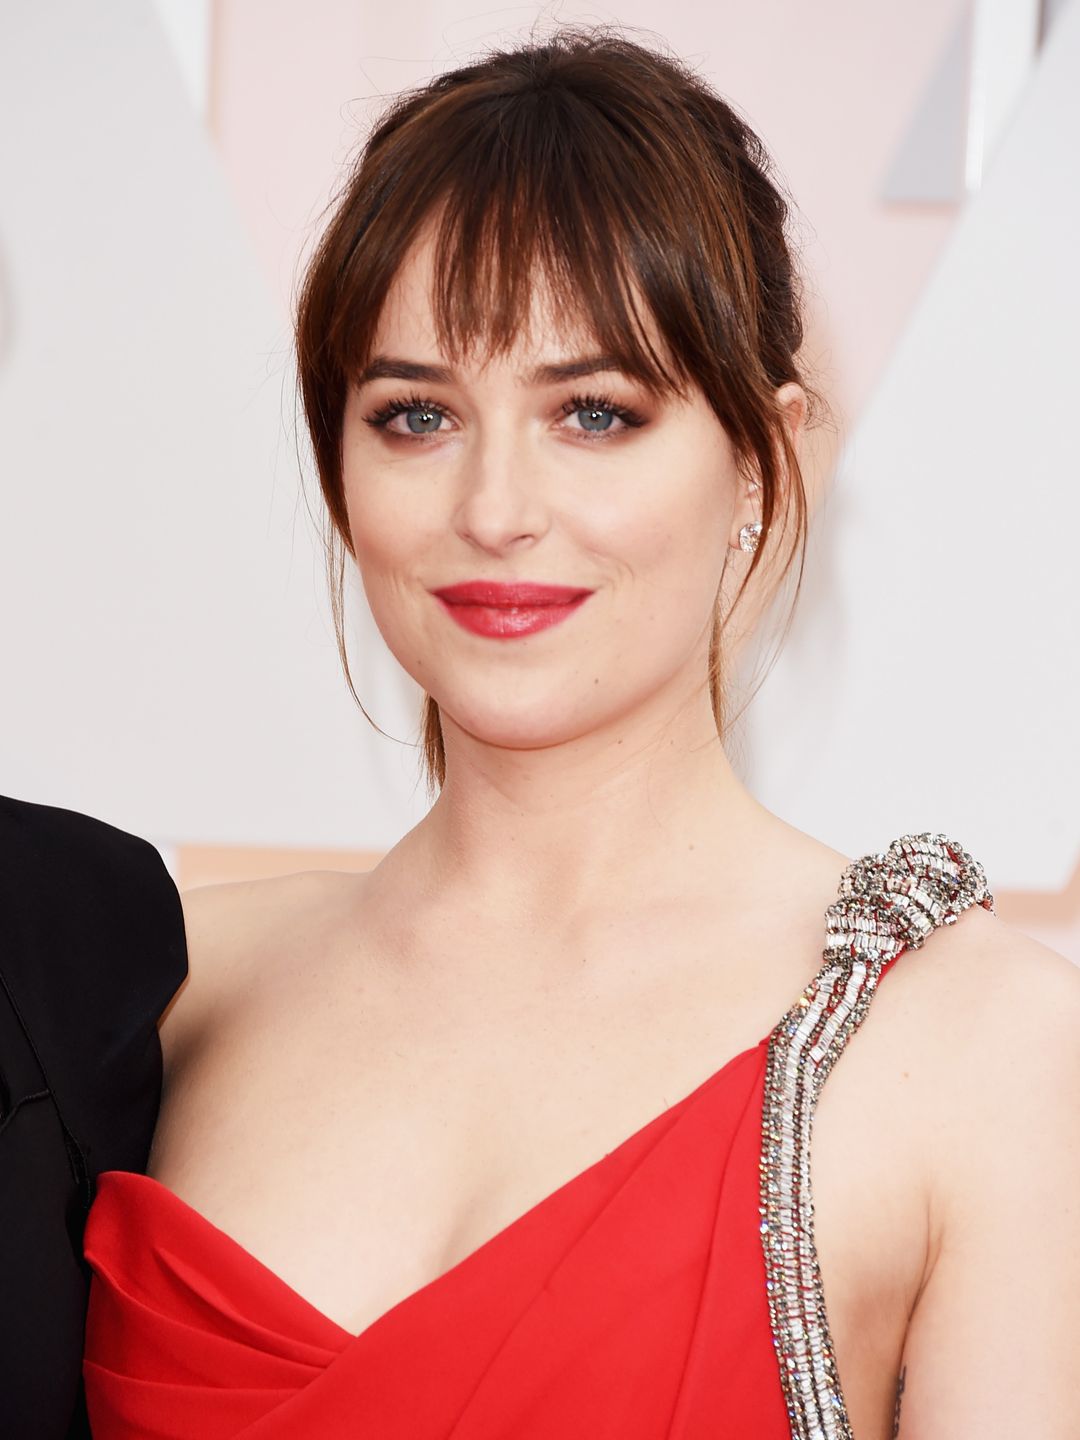 HOLLYWOOD, CA - FEBRUARY 22:  Actress Dakota Johnson attends the 87th Annual Academy Awards at Hollywood & Highland Center on February 22, 2015 in Hollywood, California.  (Photo by Jason Merritt/Getty Images)